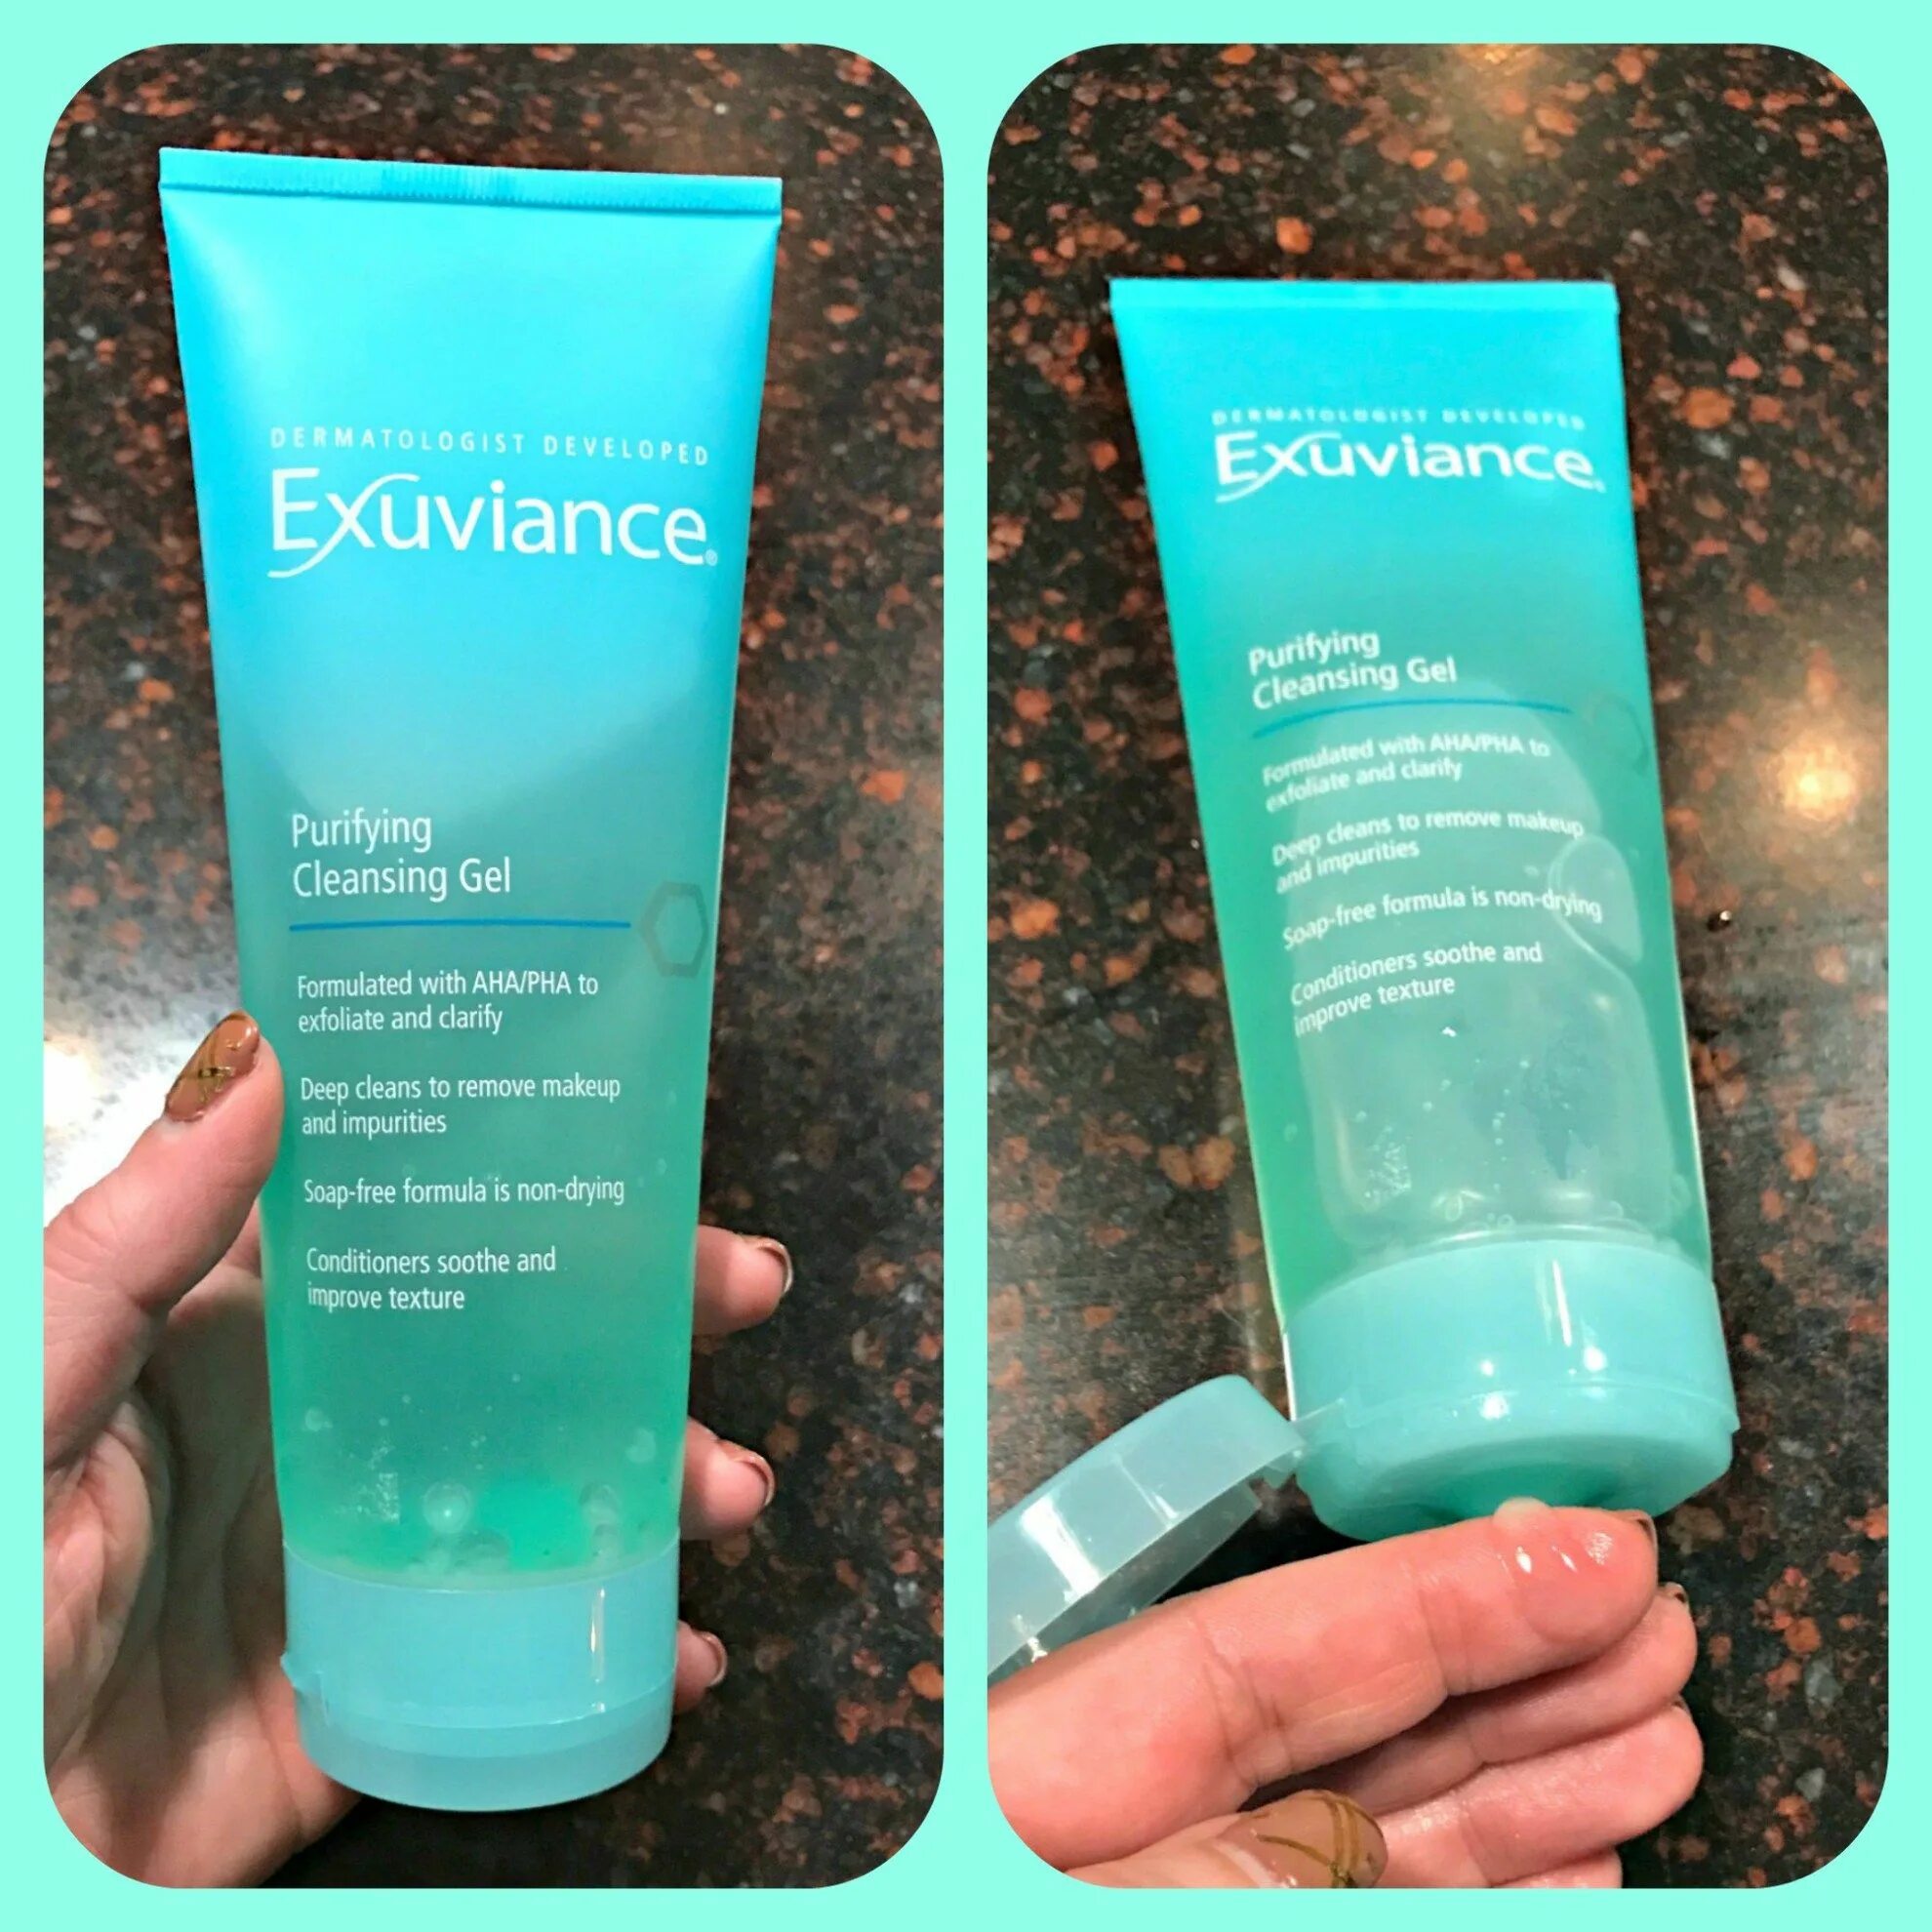 Exuviance Cleansing Gel косметика. Exuviance Purifying Cleansing Gel. Умывалка Purifying Cleanser. Cell Fusion c Purifying Cleansing Gel. Purifying cleansing gel